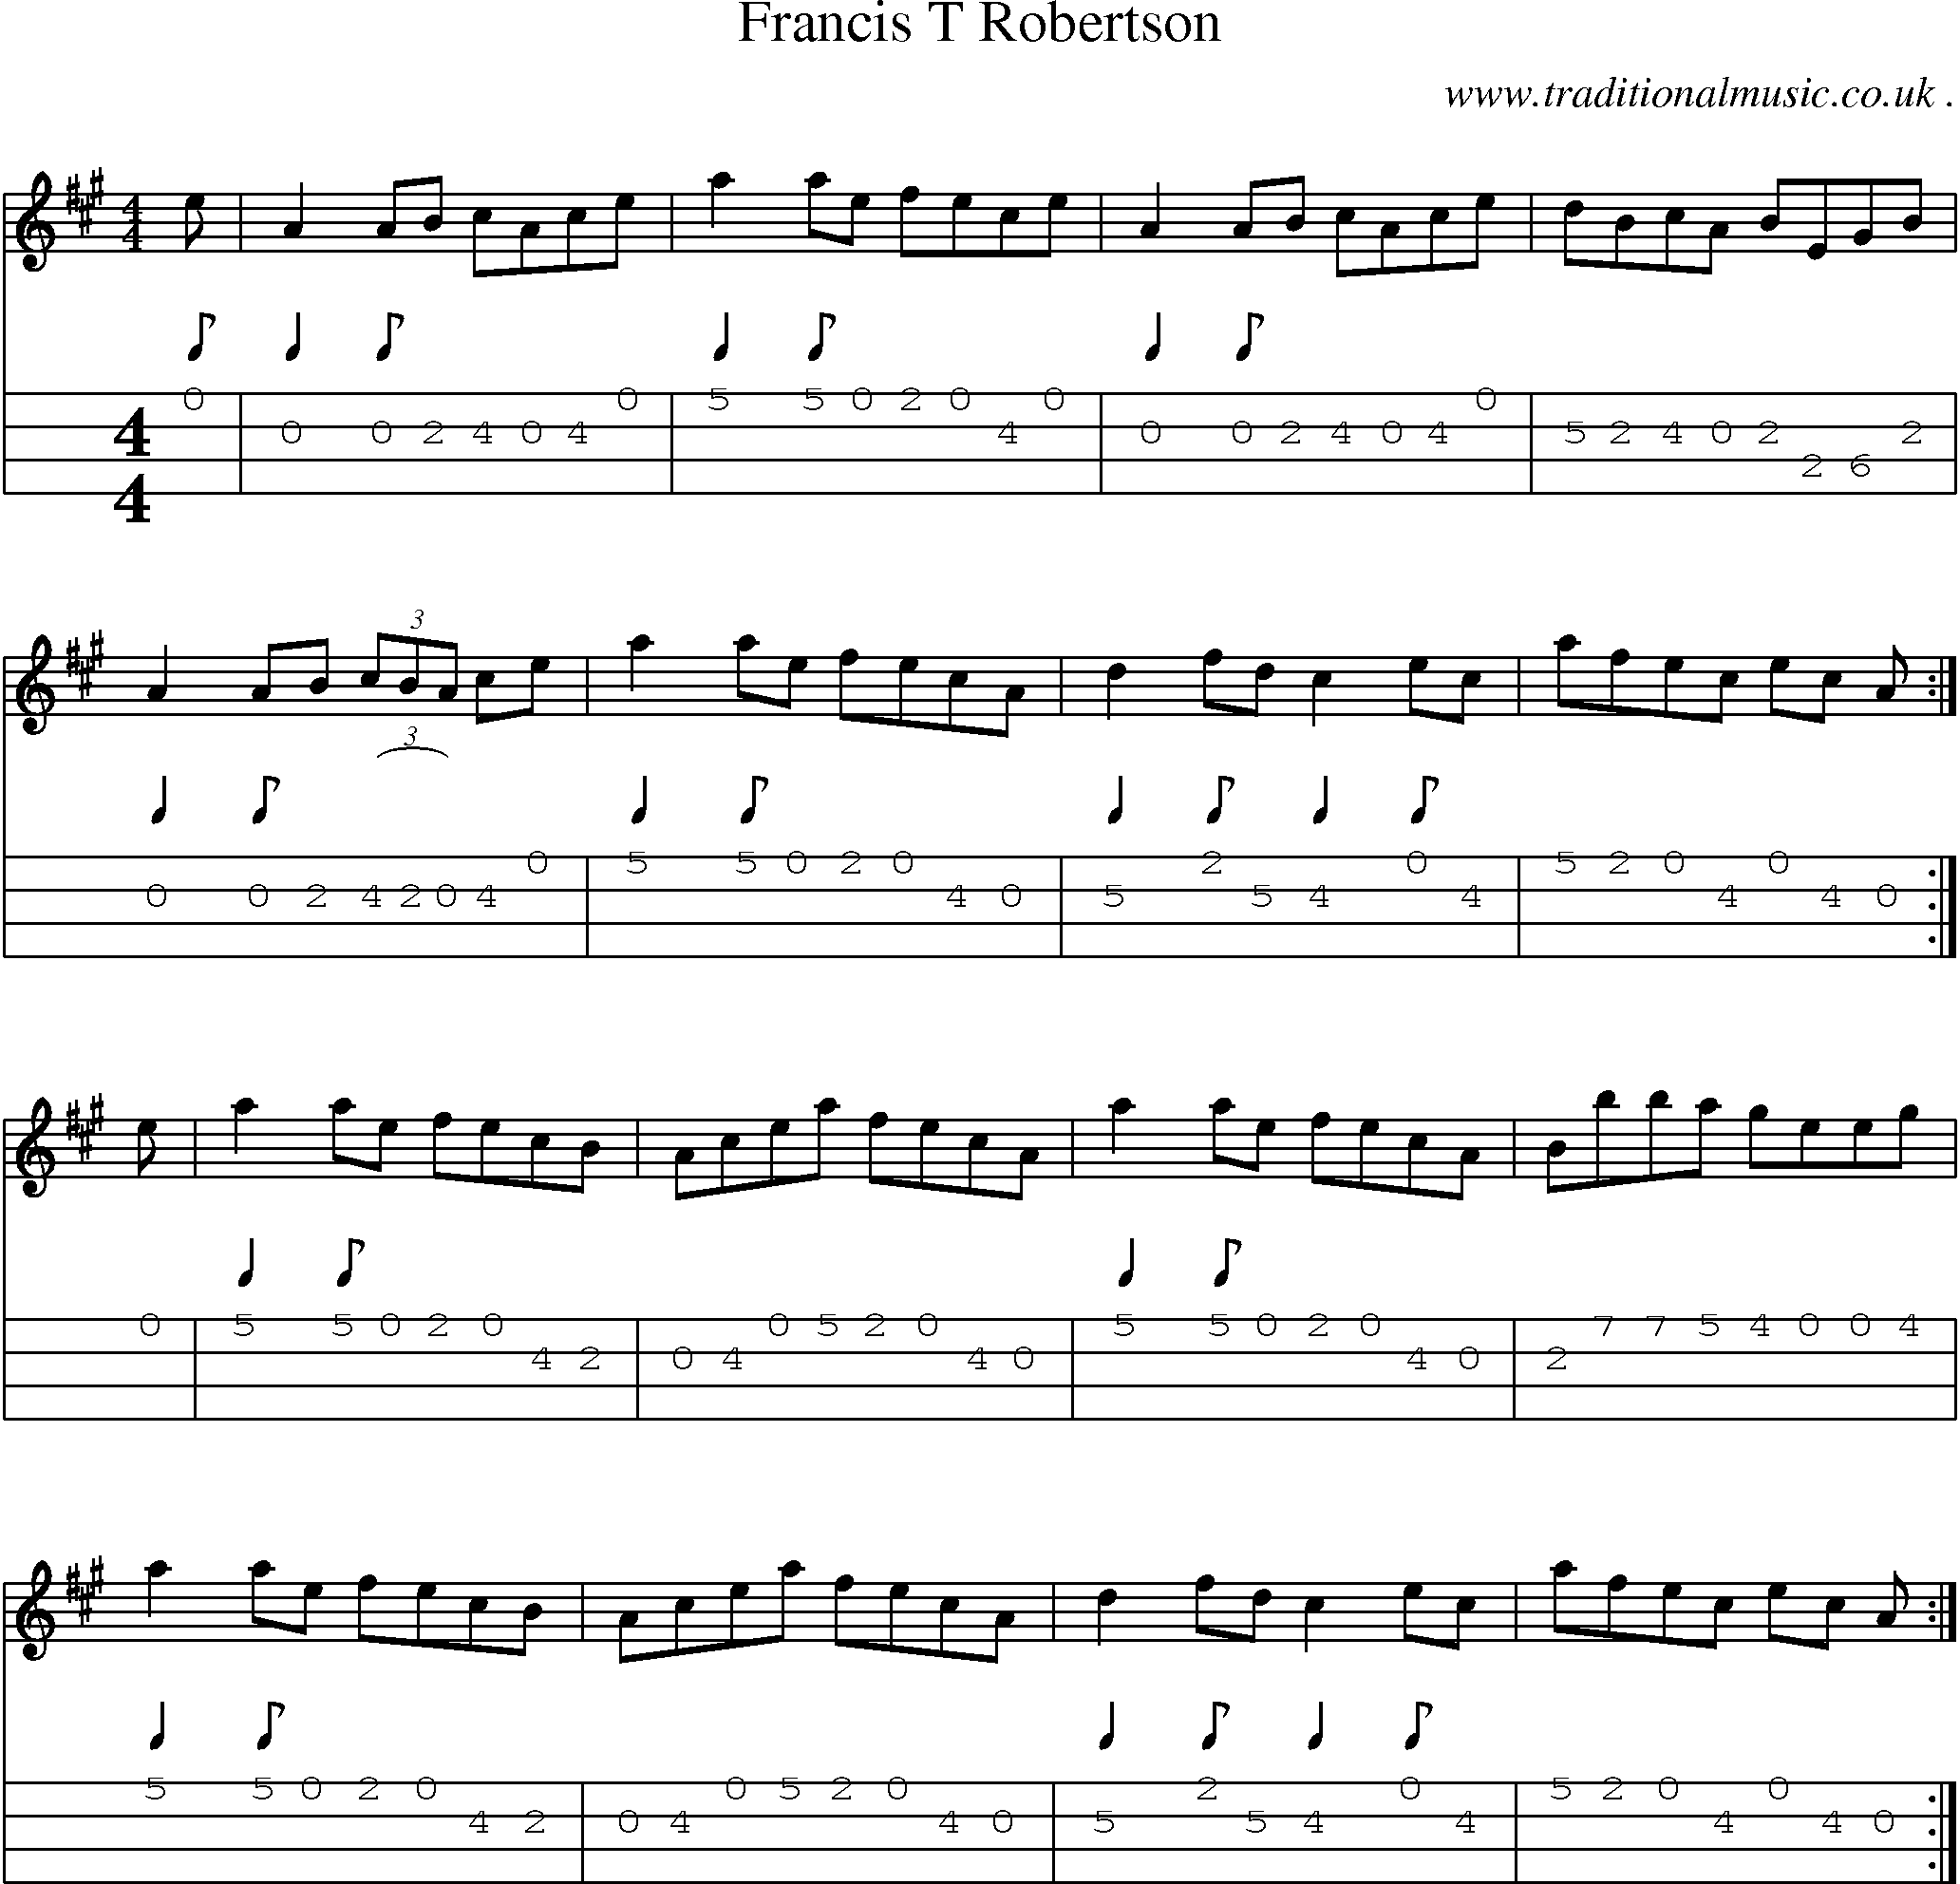 Sheet-music  score, Chords and Mandolin Tabs for Francis T Robertson